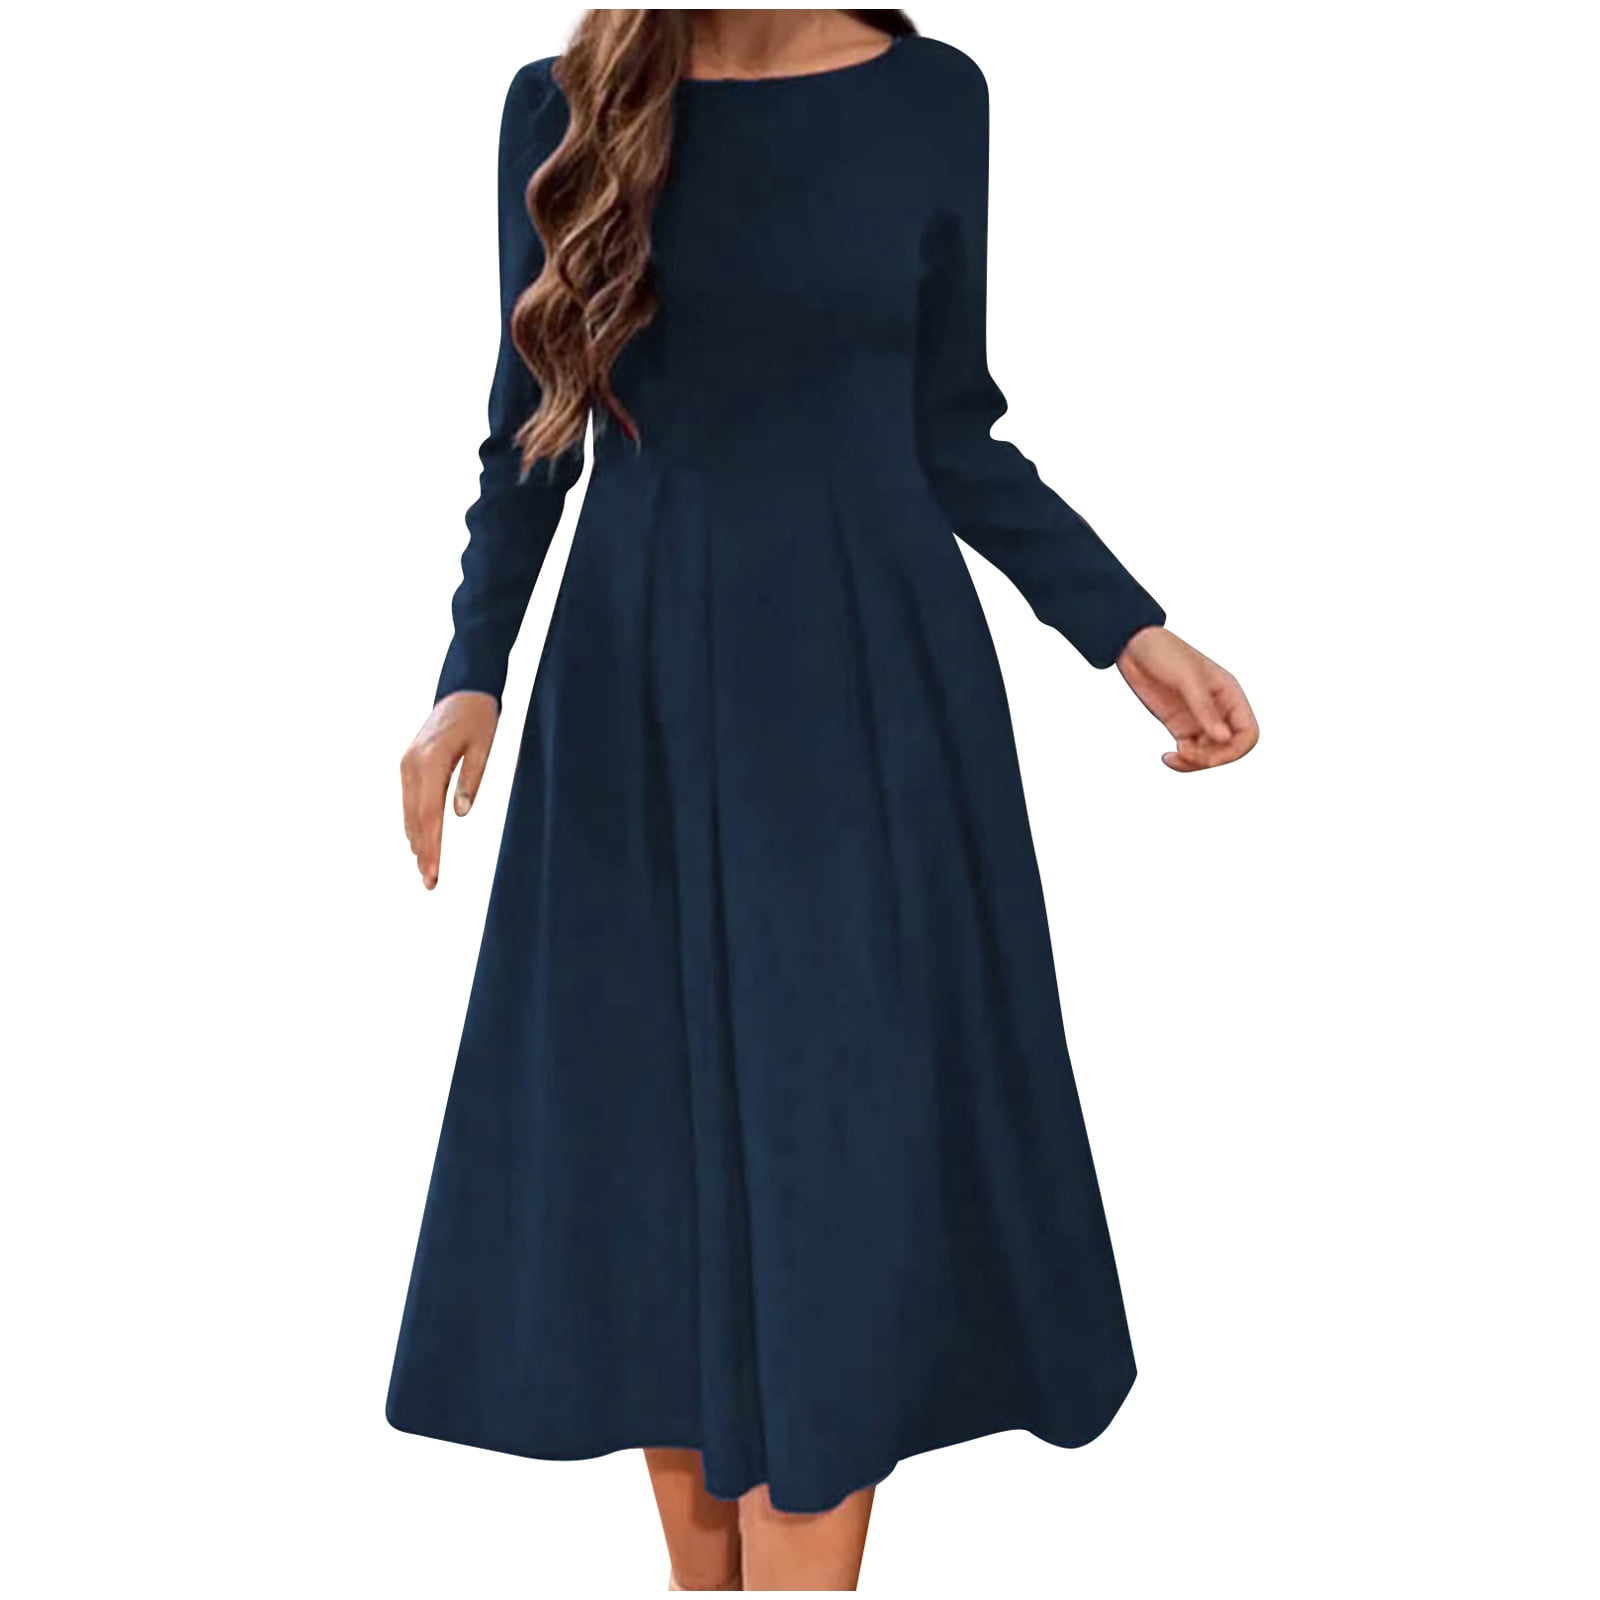 safuny Women's Tea Length Loose Cotton Dress Solid Color Holiday Round Neck  Elegant Casual Daily Comfy Trendy Dresses Long Sleeve Wine L 